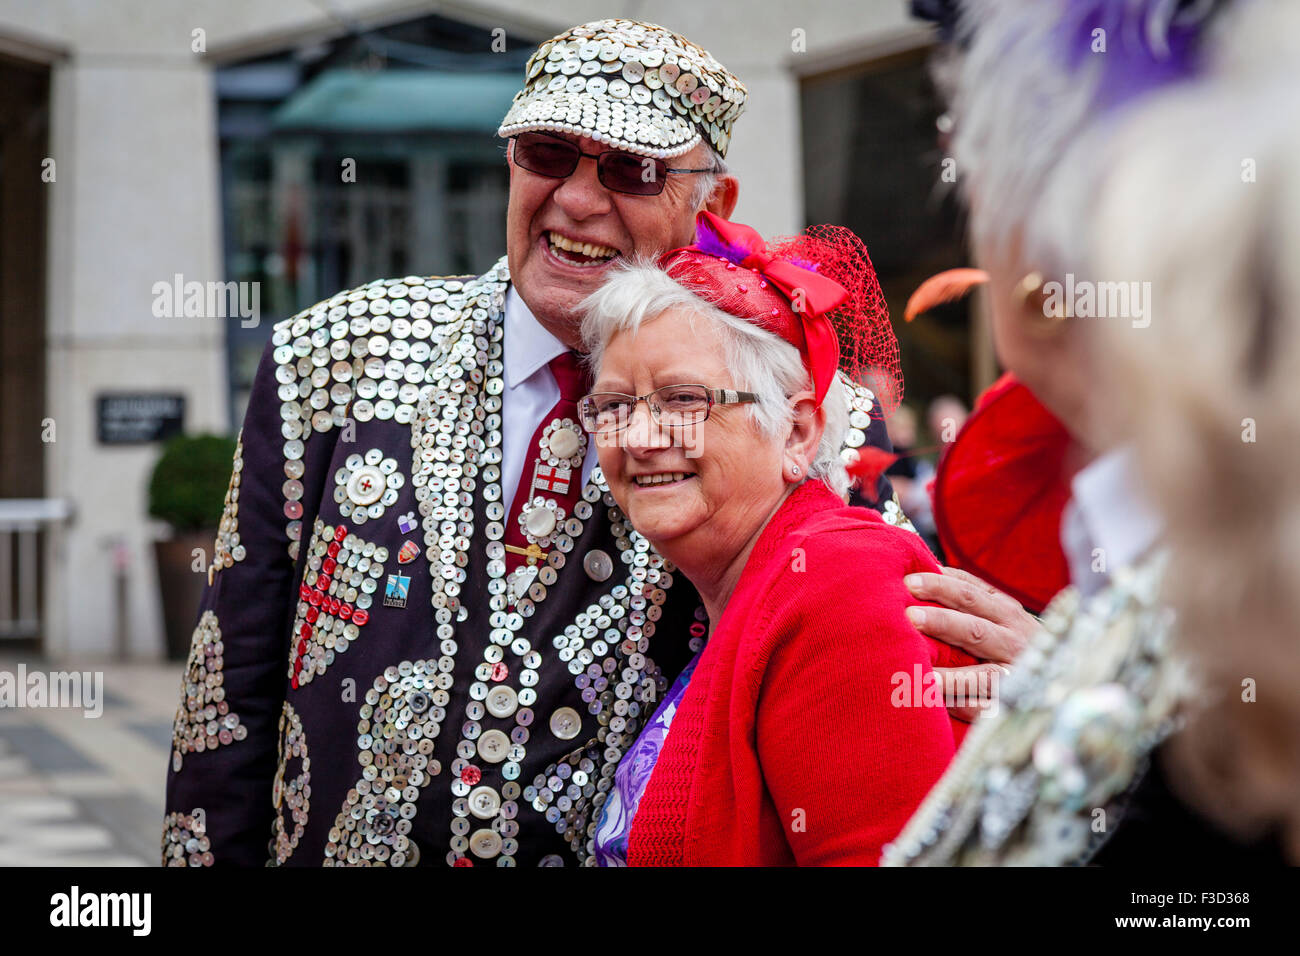 A Pearly King Poses For A Photograph At The Annual Pearly Kings and Queens Harvest Festival Held At The Guildhall, London, UK Stock Photo